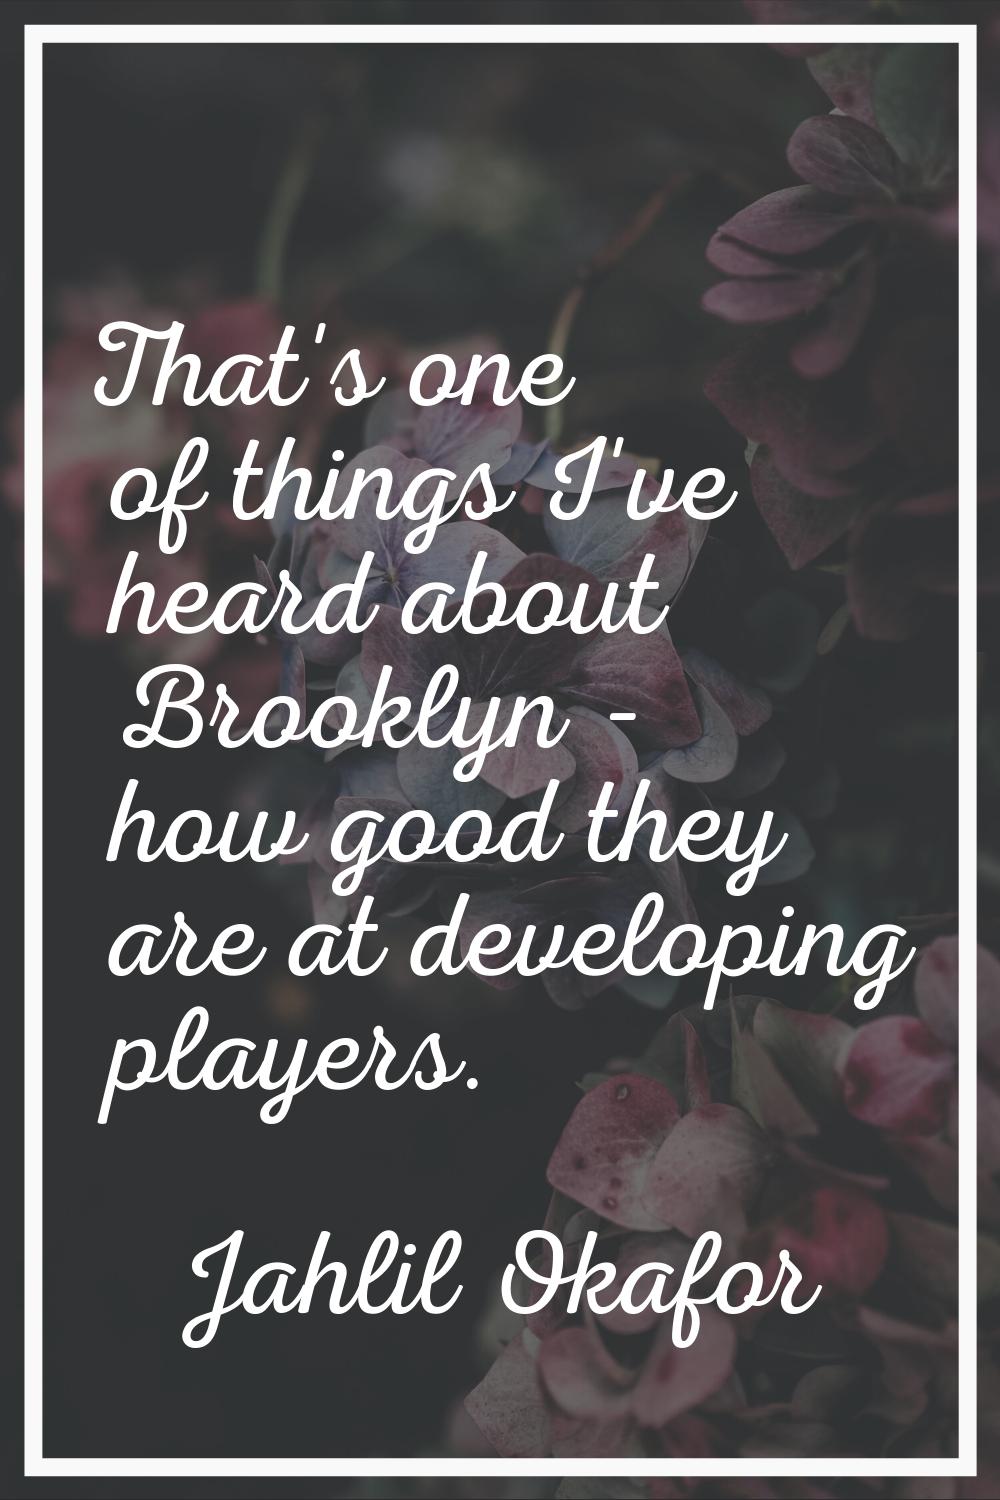 That's one of things I've heard about Brooklyn - how good they are at developing players.